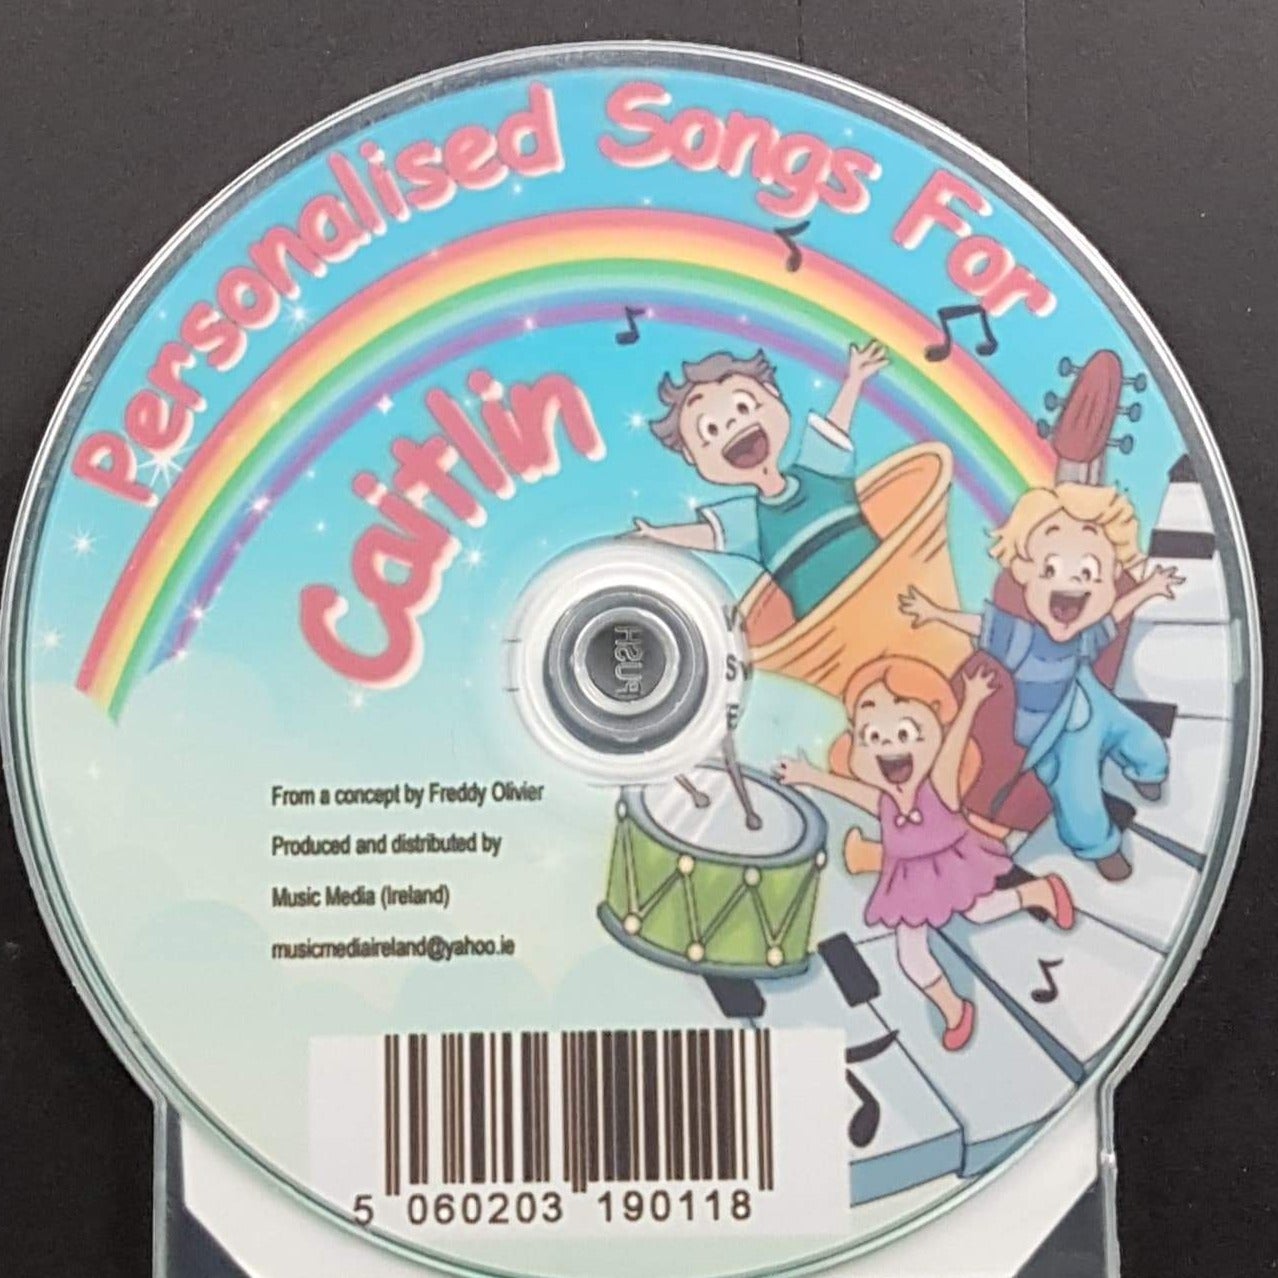 CD - Personalised Children's Songs / Caitlin